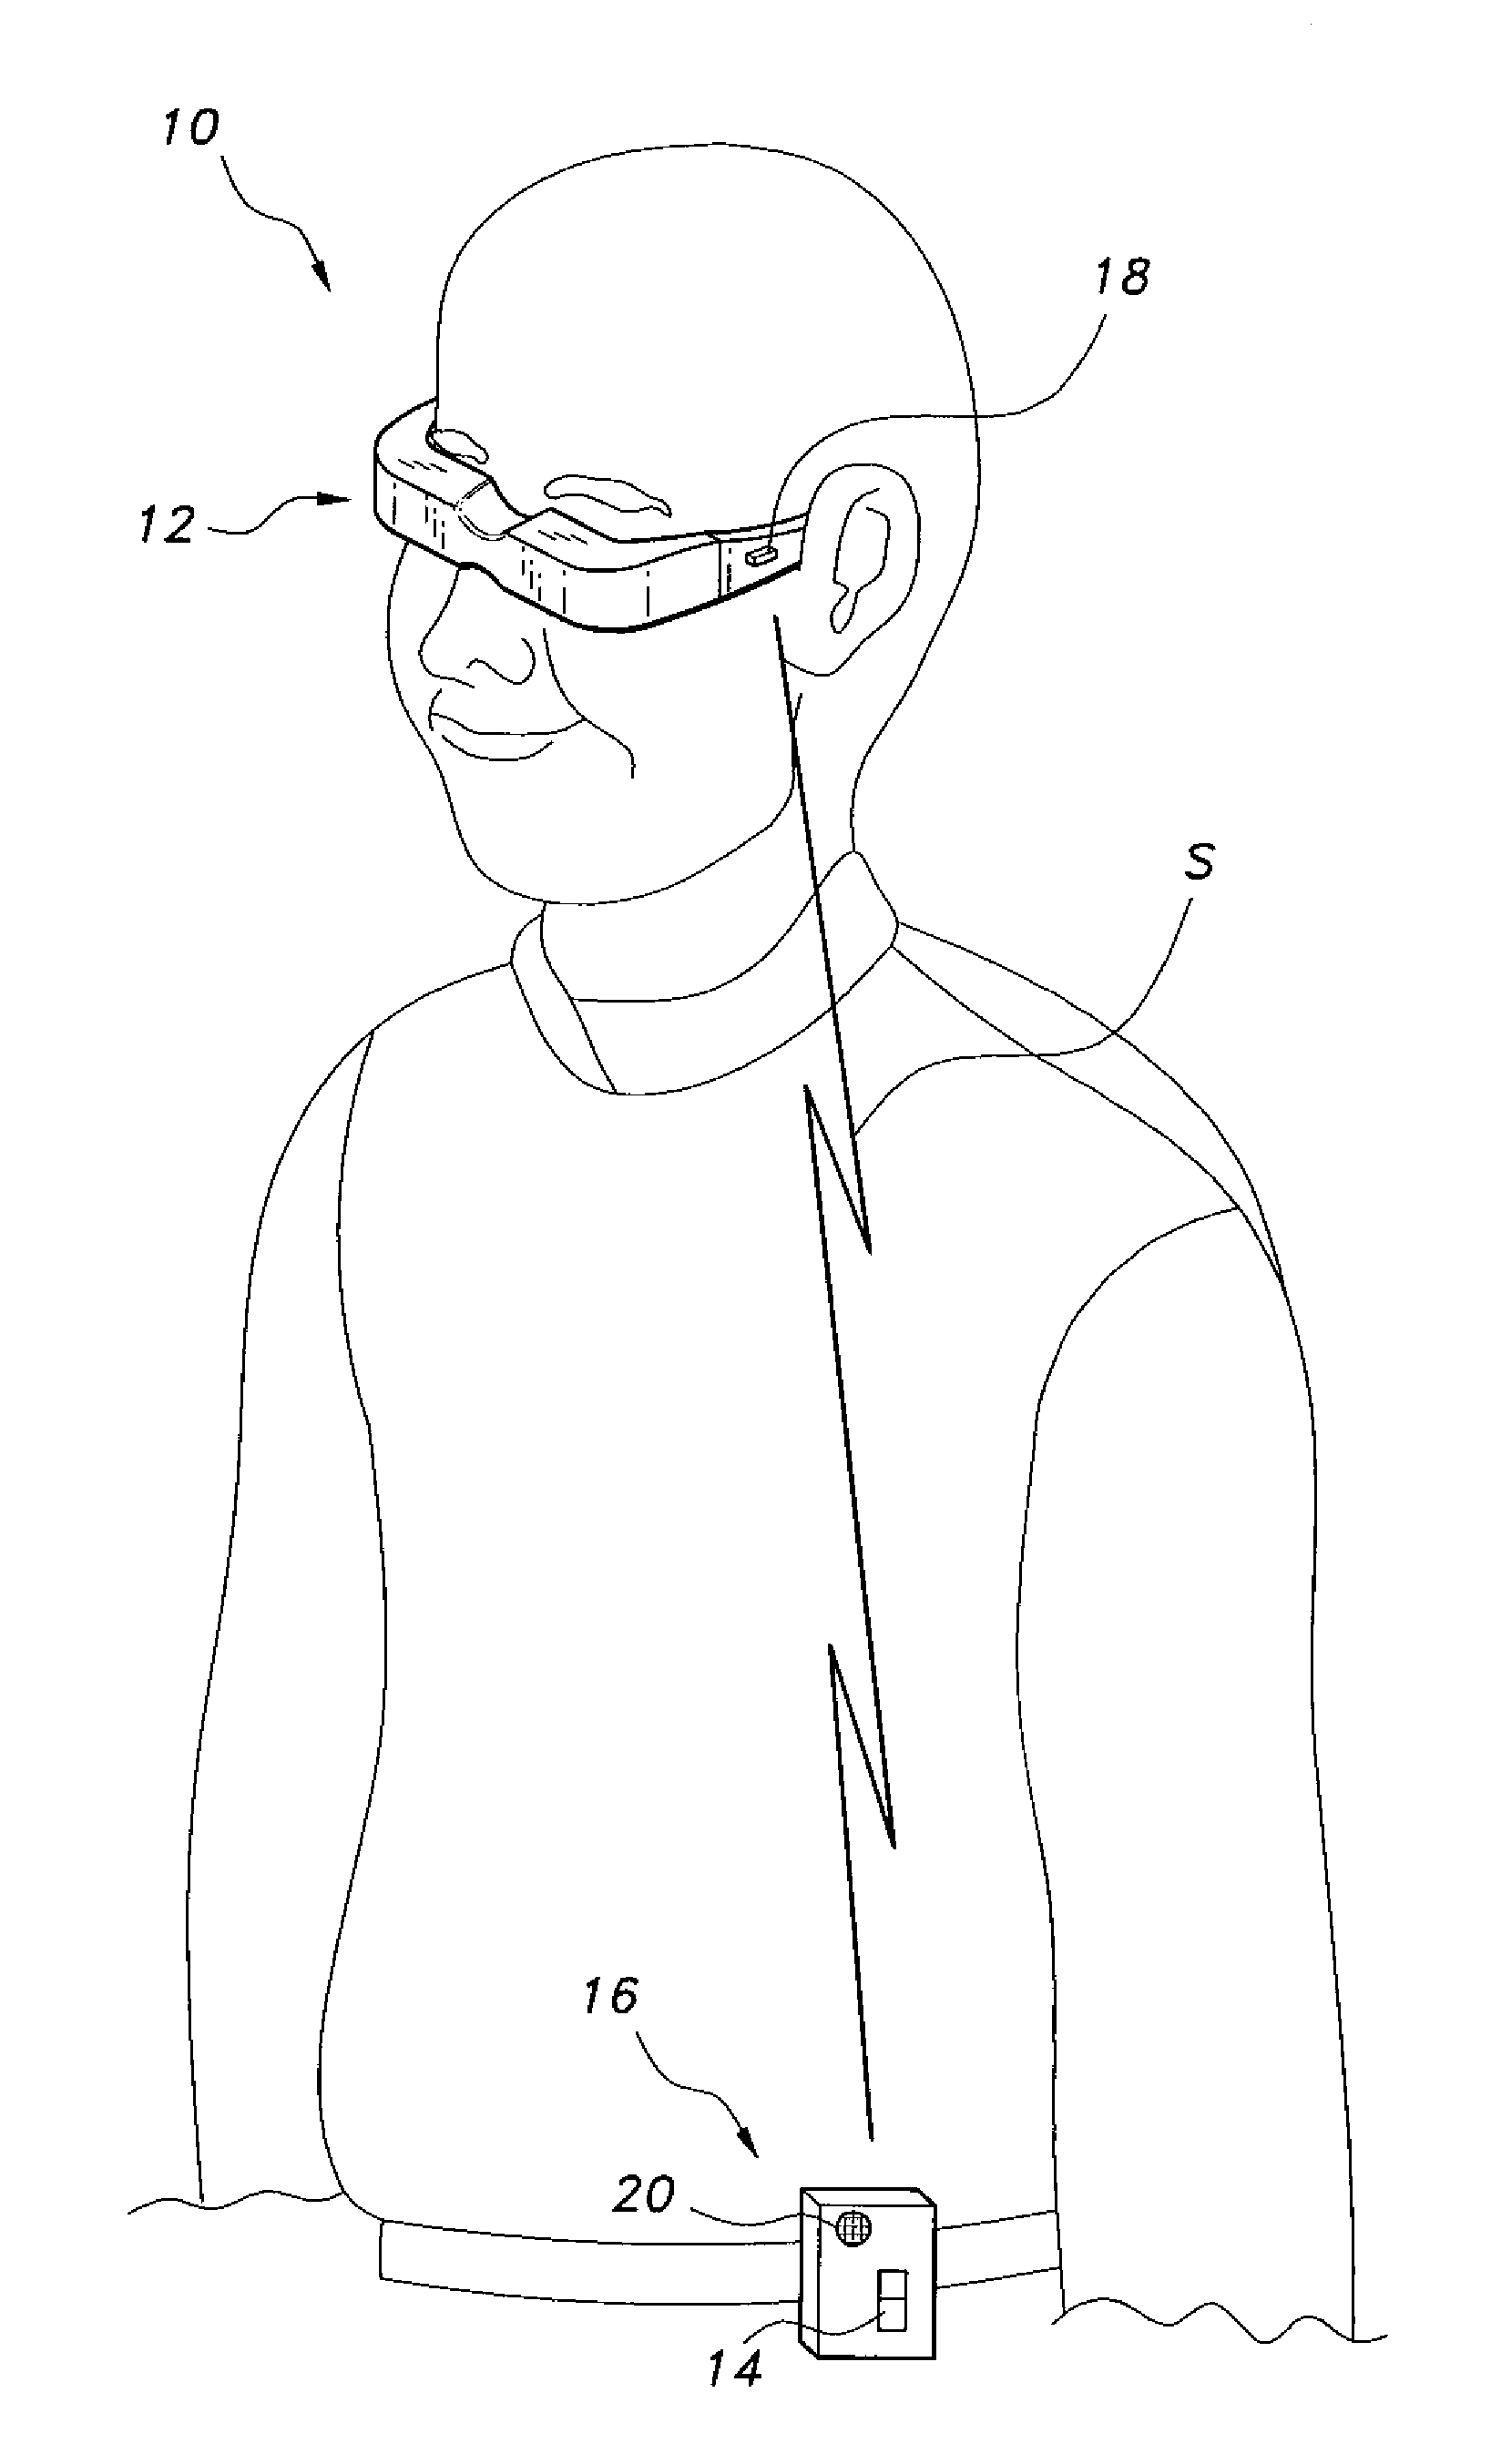 Head-mounted text display system and method for the hearing impaired